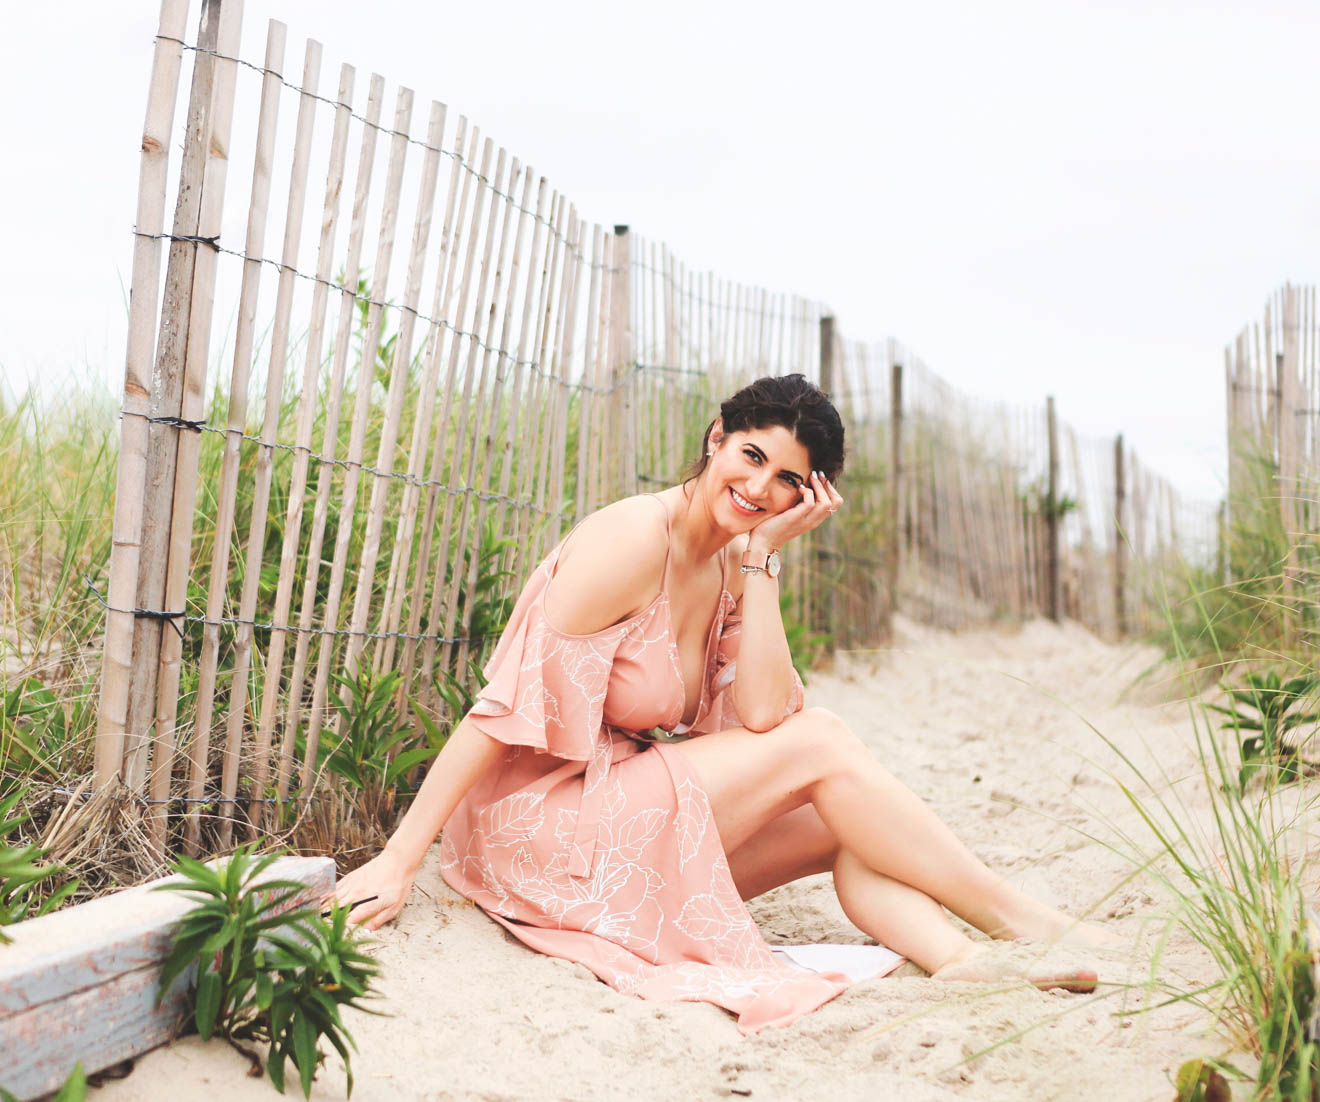 Hamptons Travel Guide, Laura Lily Fashion Travel and Lifestyle Blog, Best Places to See in The Hamptons, Shop Tobi Dress,